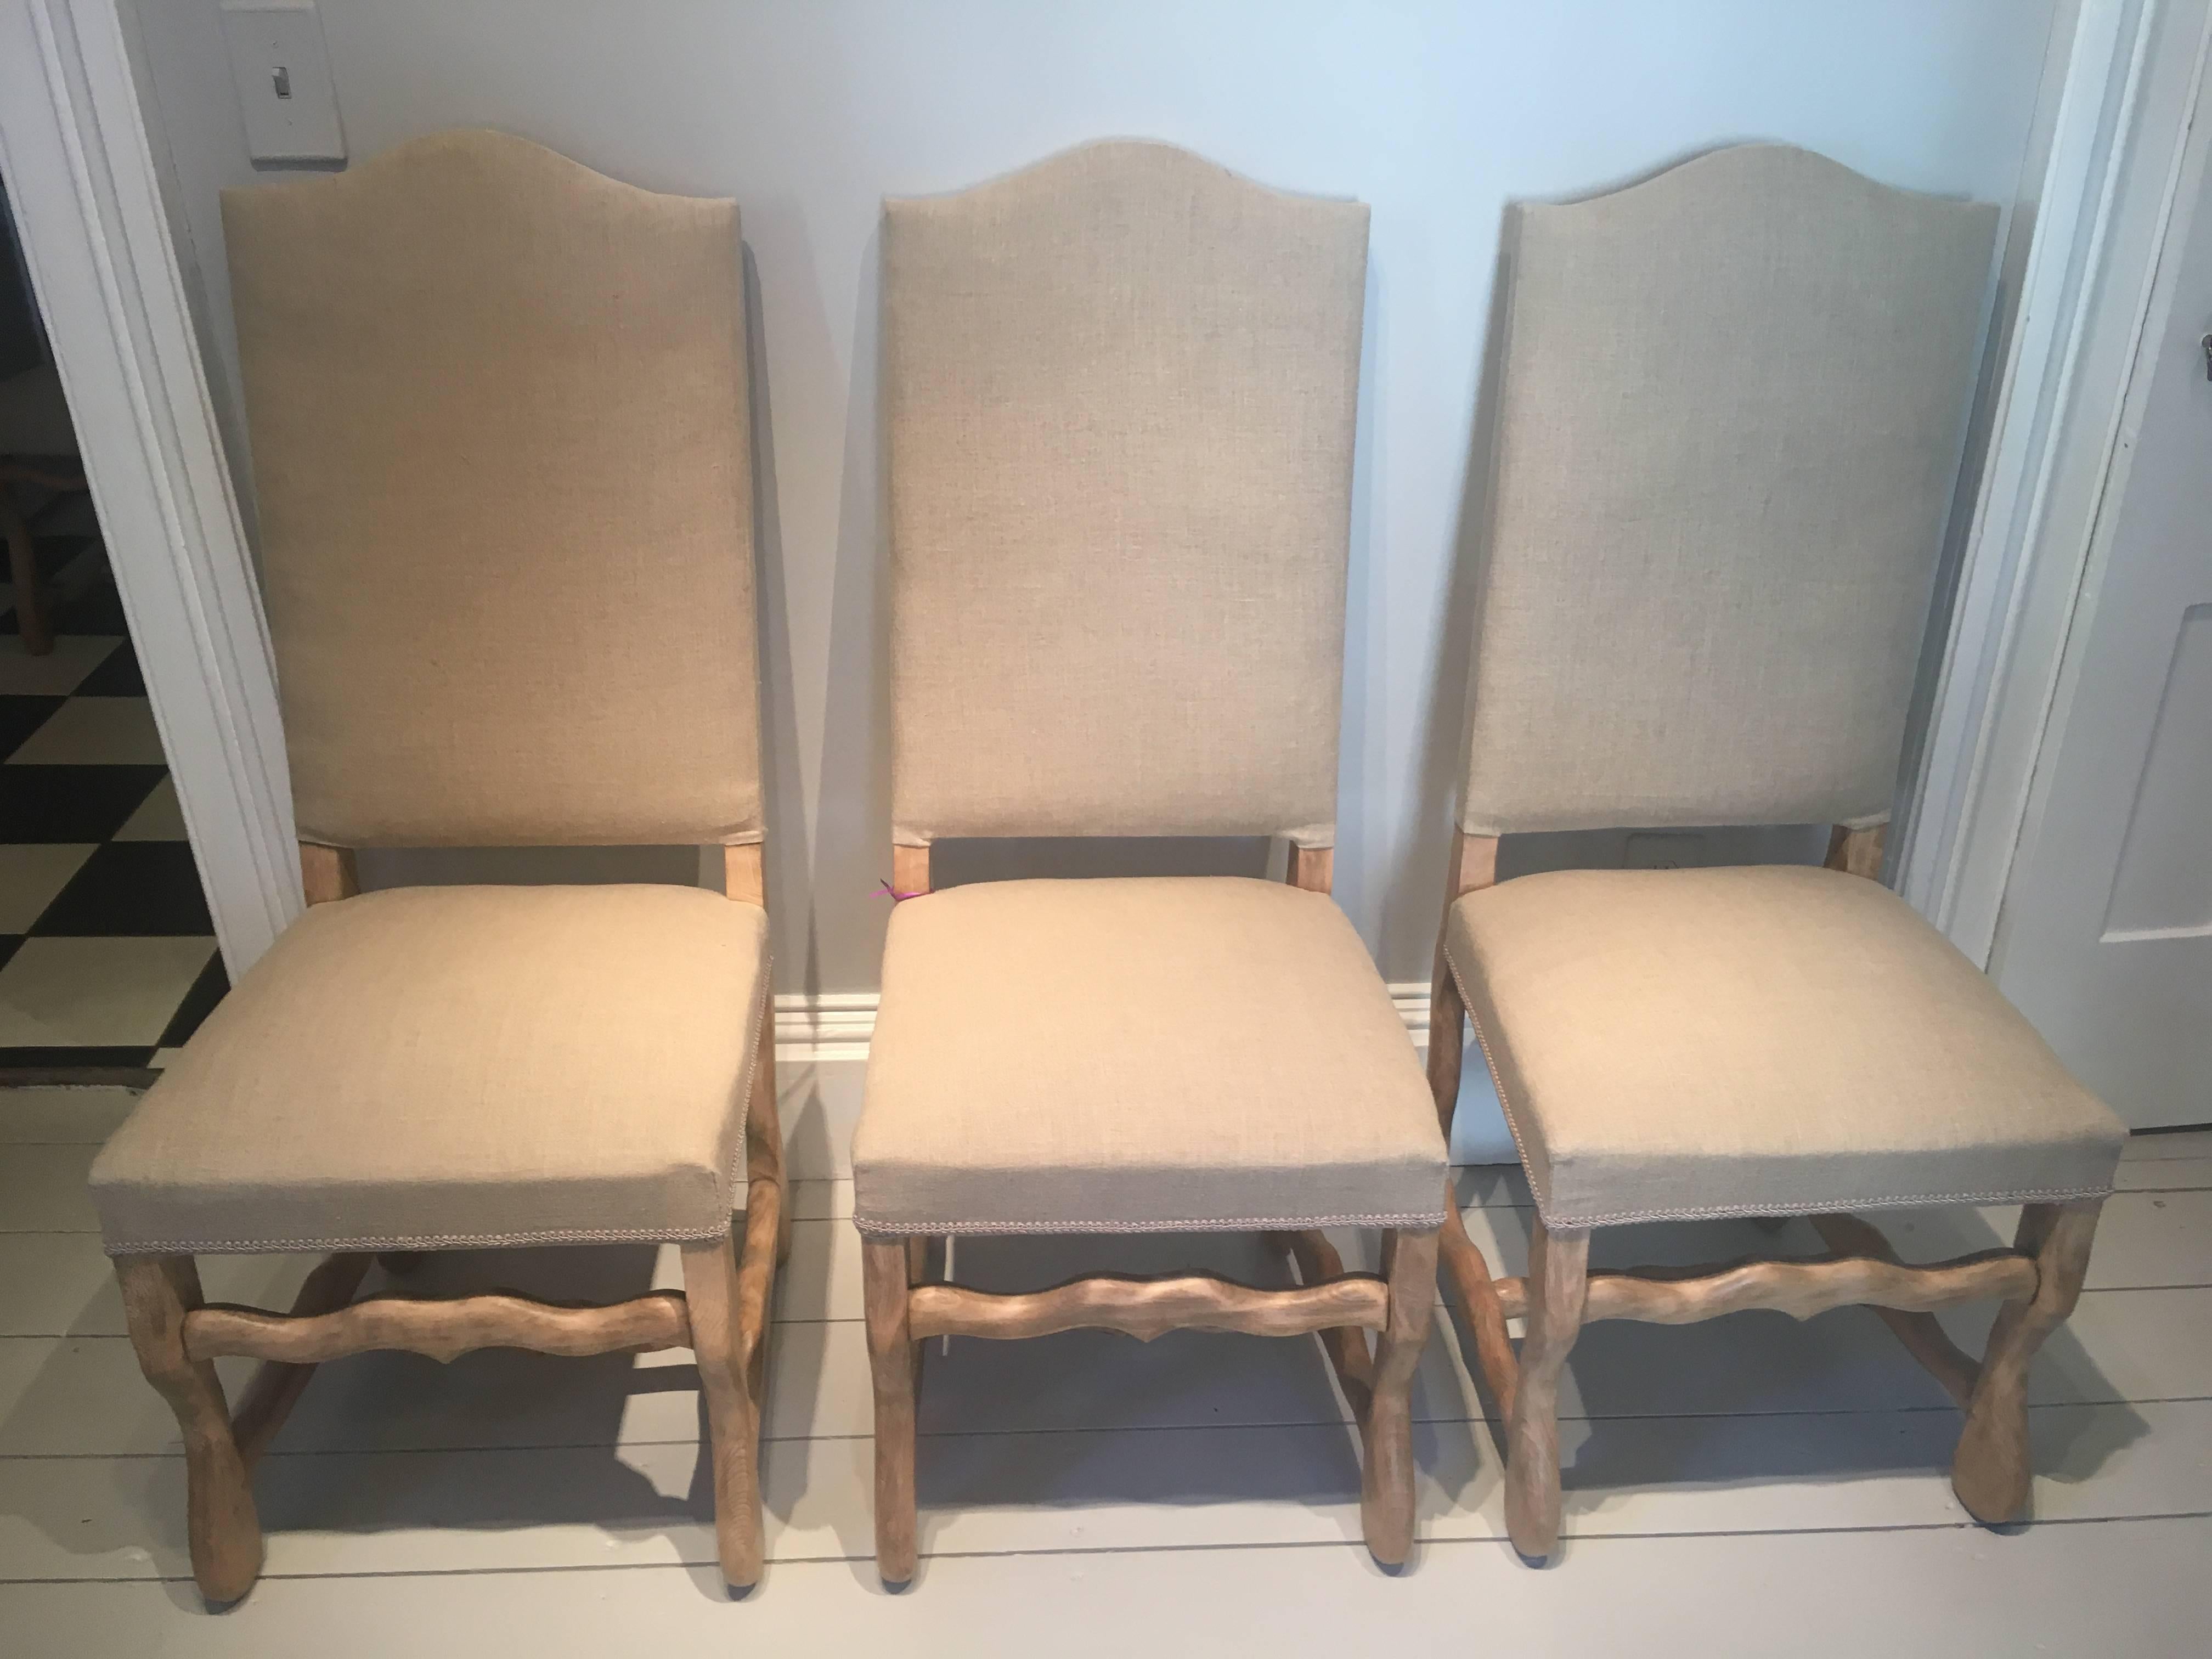 This set of six Os de Mouton chairs is all handmade from beech and dates to the late 19th C. With very desirable "Chapiteau du Gendarme" arched tops, the beech legs have been stripped and waxed to achieve a warm, pale color that is